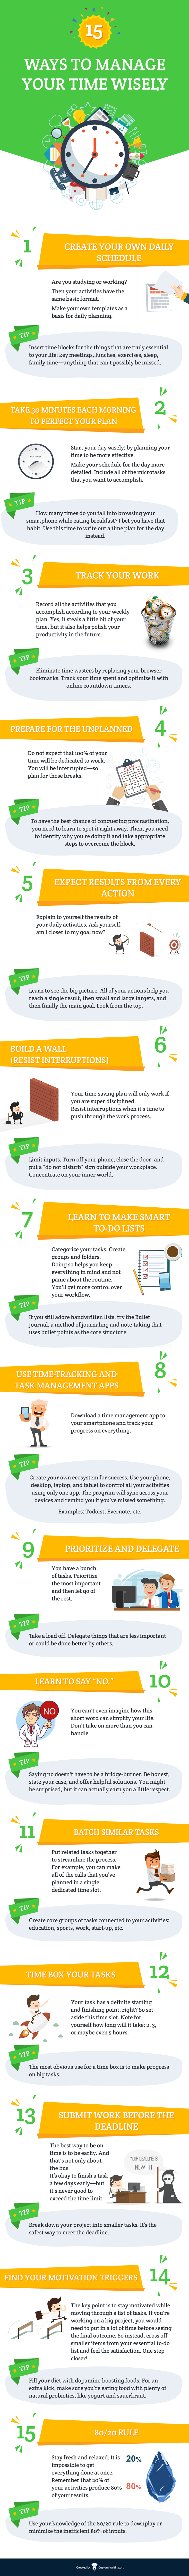 15 Awesome Time-Management Techniques- Infographic